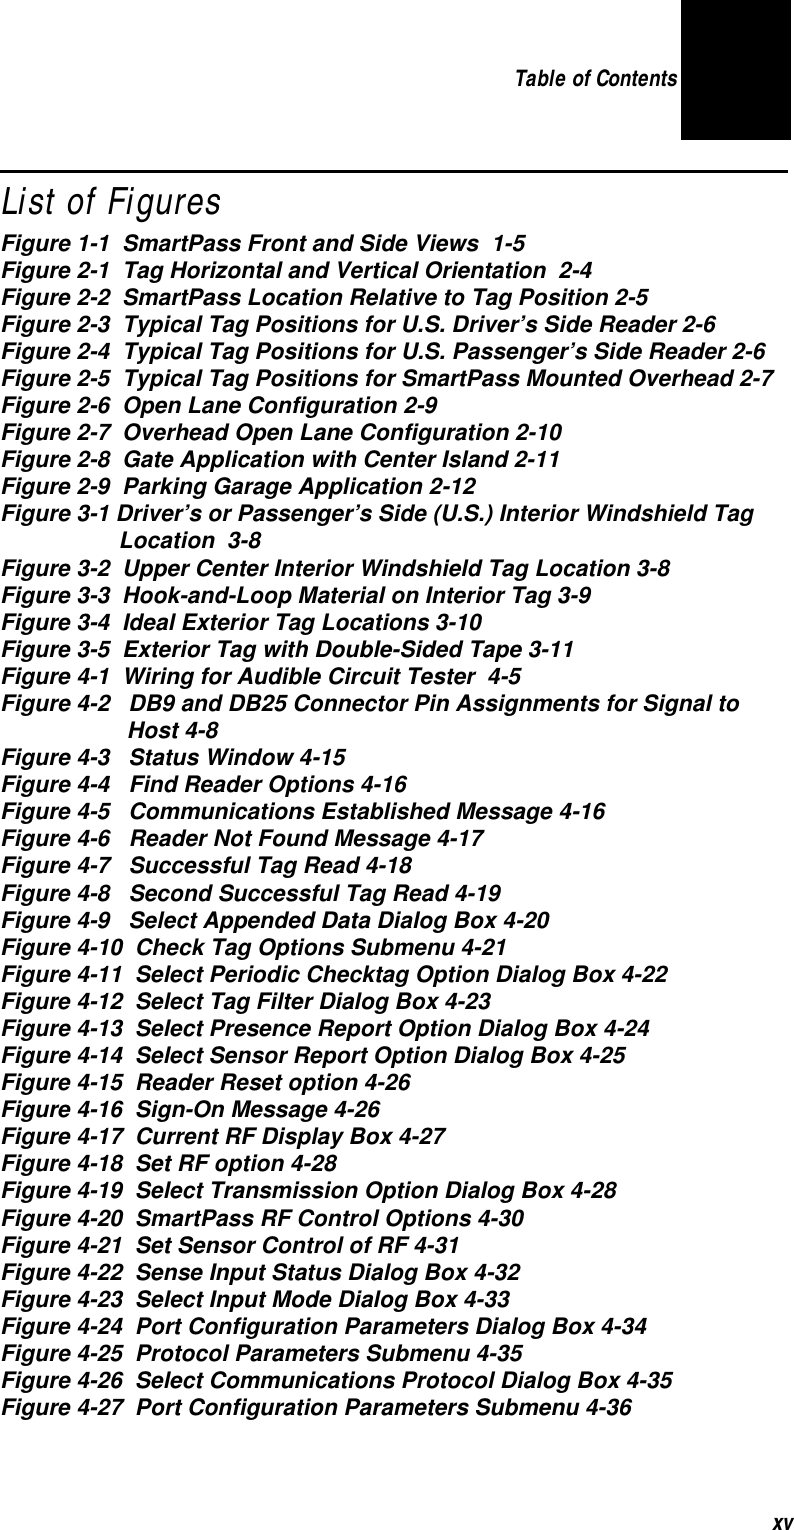 Table of Contents xvList of FiguresFigure 1-1  SmartPass Front and Side Views  1-5Figure 2-1  Tag Horizontal and Vertical Orientation  2-4Figure 2-2  SmartPass Location Relative to Tag Position 2-5Figure 2-3  Typical Tag Positions for U.S. Driver’s Side Reader 2-6Figure 2-4  Typical Tag Positions for U.S. Passenger’s Side Reader 2-6Figure 2-5  Typical Tag Positions for SmartPass Mounted Overhead 2-7Figure 2-6  Open Lane Configuration 2-9Figure 2-7  Overhead Open Lane Configuration 2-10Figure 2-8  Gate Application with Center Island 2-11Figure 2-9  Parking Garage Application 2-12Figure 3-1 Driver’s or Passenger’s Side (U.S.) Interior Windshield Tag  Location  3-8Figure 3-2  Upper Center Interior Windshield Tag Location 3-8Figure 3-3  Hook-and-Loop Material on Interior Tag 3-9Figure 3-4  Ideal Exterior Tag Locations 3-10Figure 3-5  Exterior Tag with Double-Sided Tape 3-11Figure 4-1  Wiring for Audible Circuit Tester  4-5Figure 4-2   DB9 and DB25 Connector Pin Assignments for Signal to Host 4-8Figure 4-3   Status Window 4-15Figure 4-4   Find Reader Options 4-16Figure 4-5   Communications Established Message 4-16Figure 4-6   Reader Not Found Message 4-17Figure 4-7   Successful Tag Read 4-18Figure 4-8   Second Successful Tag Read 4-19Figure 4-9   Select Appended Data Dialog Box 4-20Figure 4-10  Check Tag Options Submenu 4-21Figure 4-11  Select Periodic Checktag Option Dialog Box 4-22Figure 4-12  Select Tag Filter Dialog Box 4-23Figure 4-13  Select Presence Report Option Dialog Box 4-24Figure 4-14  Select Sensor Report Option Dialog Box 4-25Figure 4-15  Reader Reset option 4-26Figure 4-16  Sign-On Message 4-26Figure 4-17  Current RF Display Box 4-27Figure 4-18  Set RF option 4-28Figure 4-19  Select Transmission Option Dialog Box 4-28Figure 4-20  SmartPass RF Control Options 4-30Figure 4-21  Set Sensor Control of RF 4-31Figure 4-22  Sense Input Status Dialog Box 4-32Figure 4-23  Select Input Mode Dialog Box 4-33Figure 4-24  Port Configuration Parameters Dialog Box 4-34Figure 4-25  Protocol Parameters Submenu 4-35Figure 4-26  Select Communications Protocol Dialog Box 4-35Figure 4-27  Port Configuration Parameters Submenu 4-36